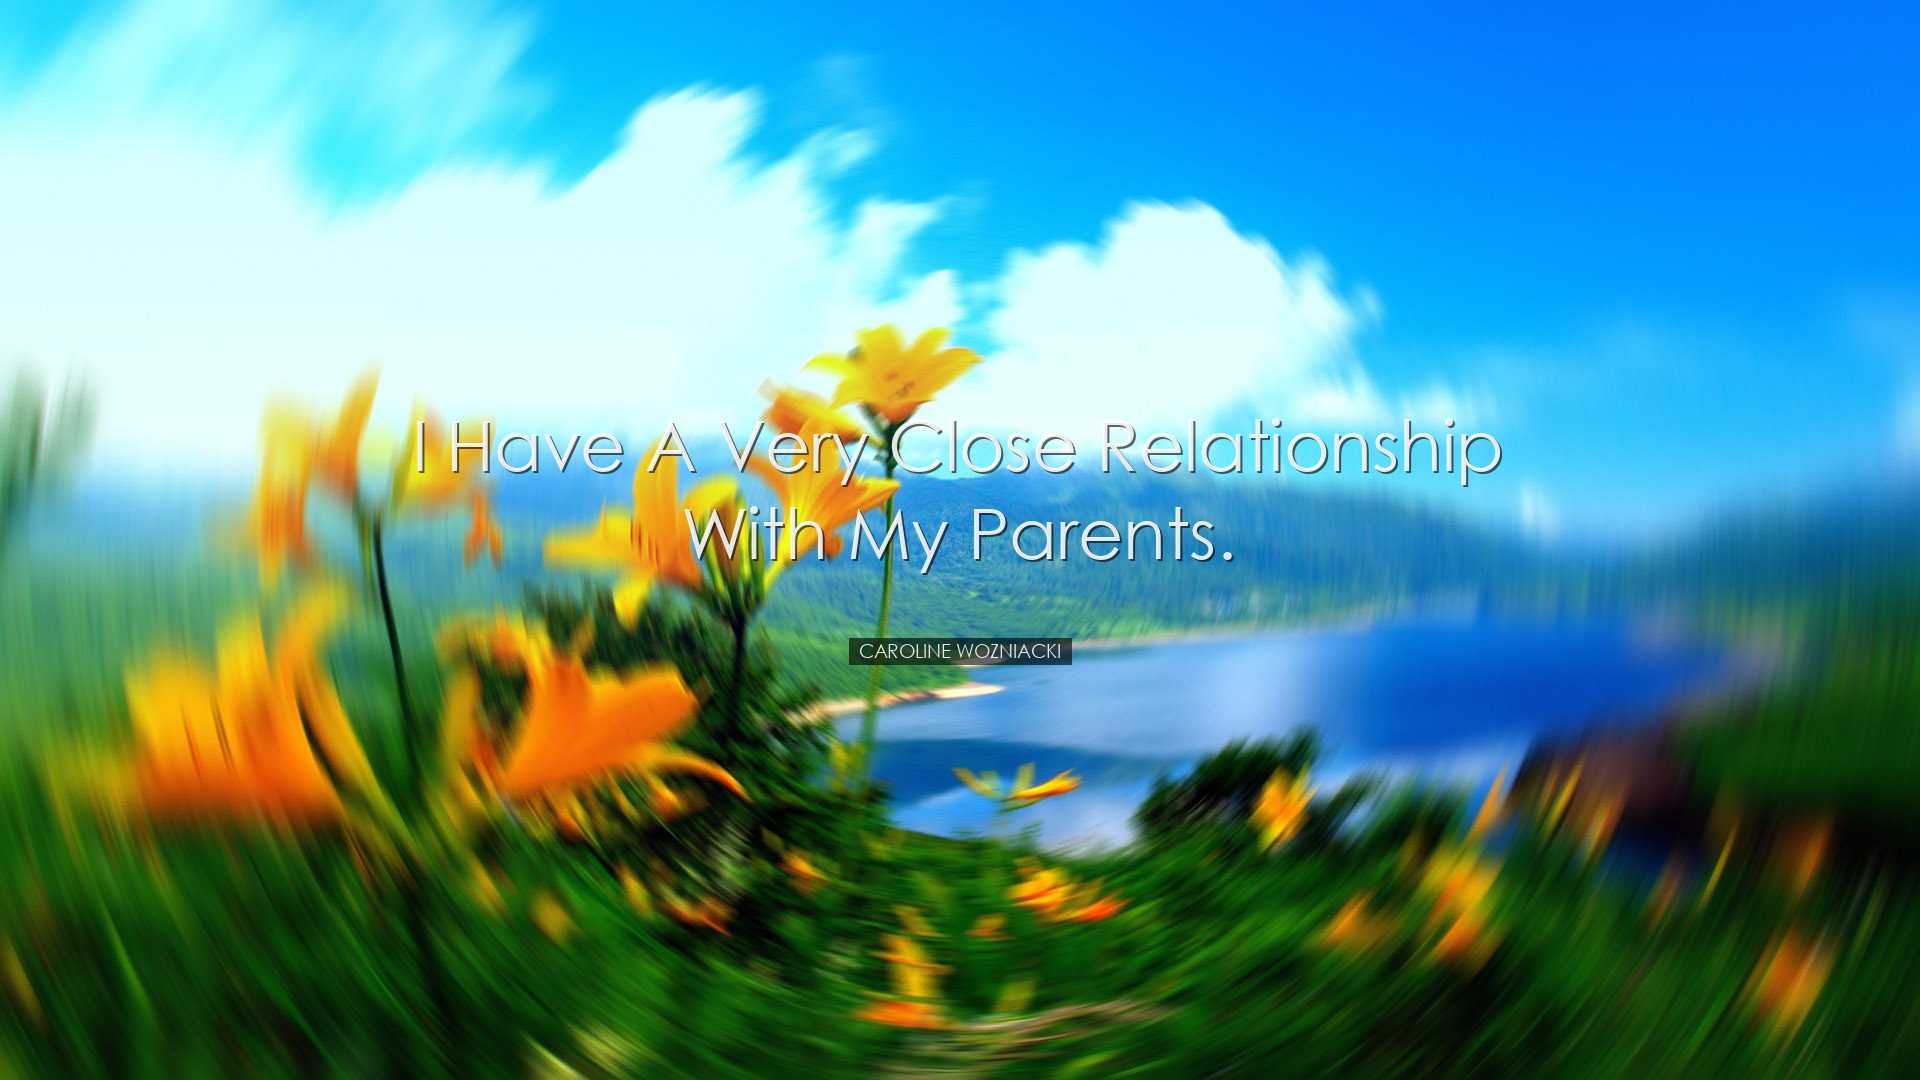 I have a very close relationship with my parents. - Caroline Wozni